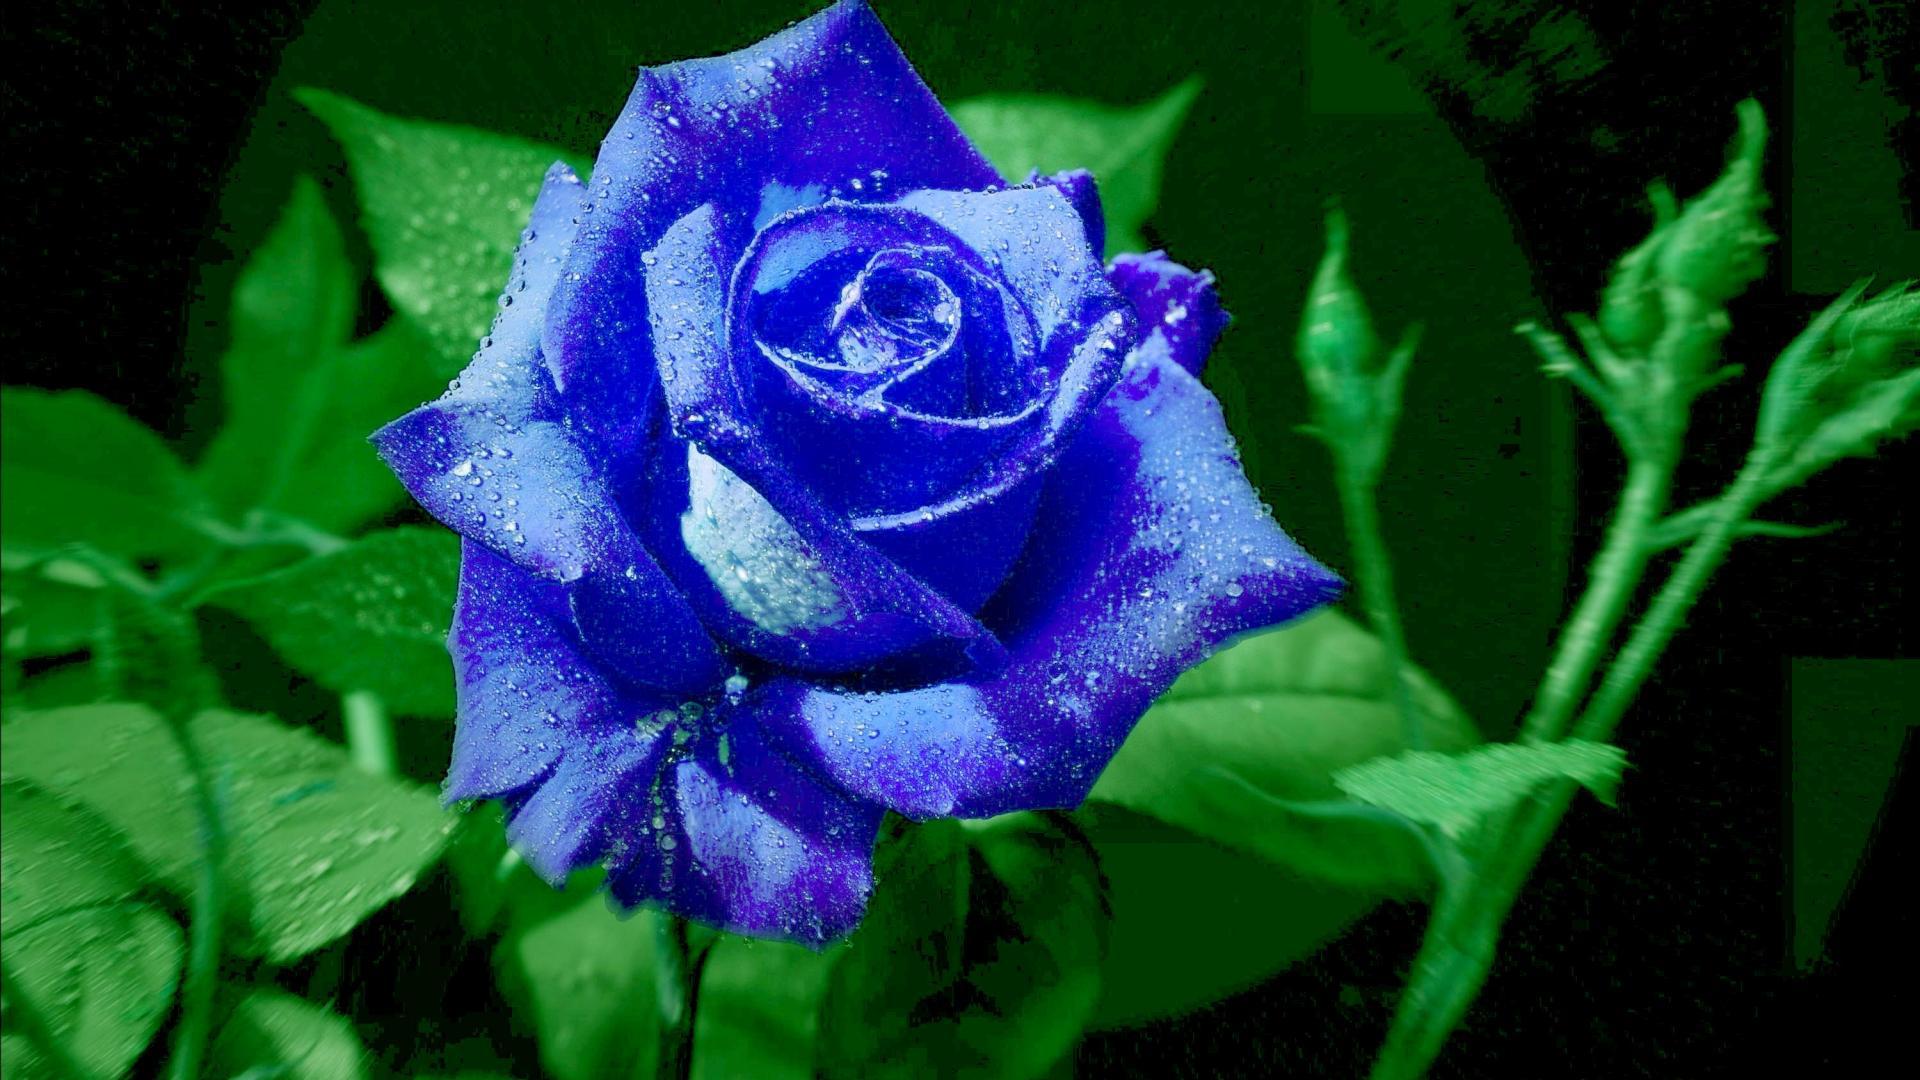 Bright blue rose wallpapers and images - wallpapers ...